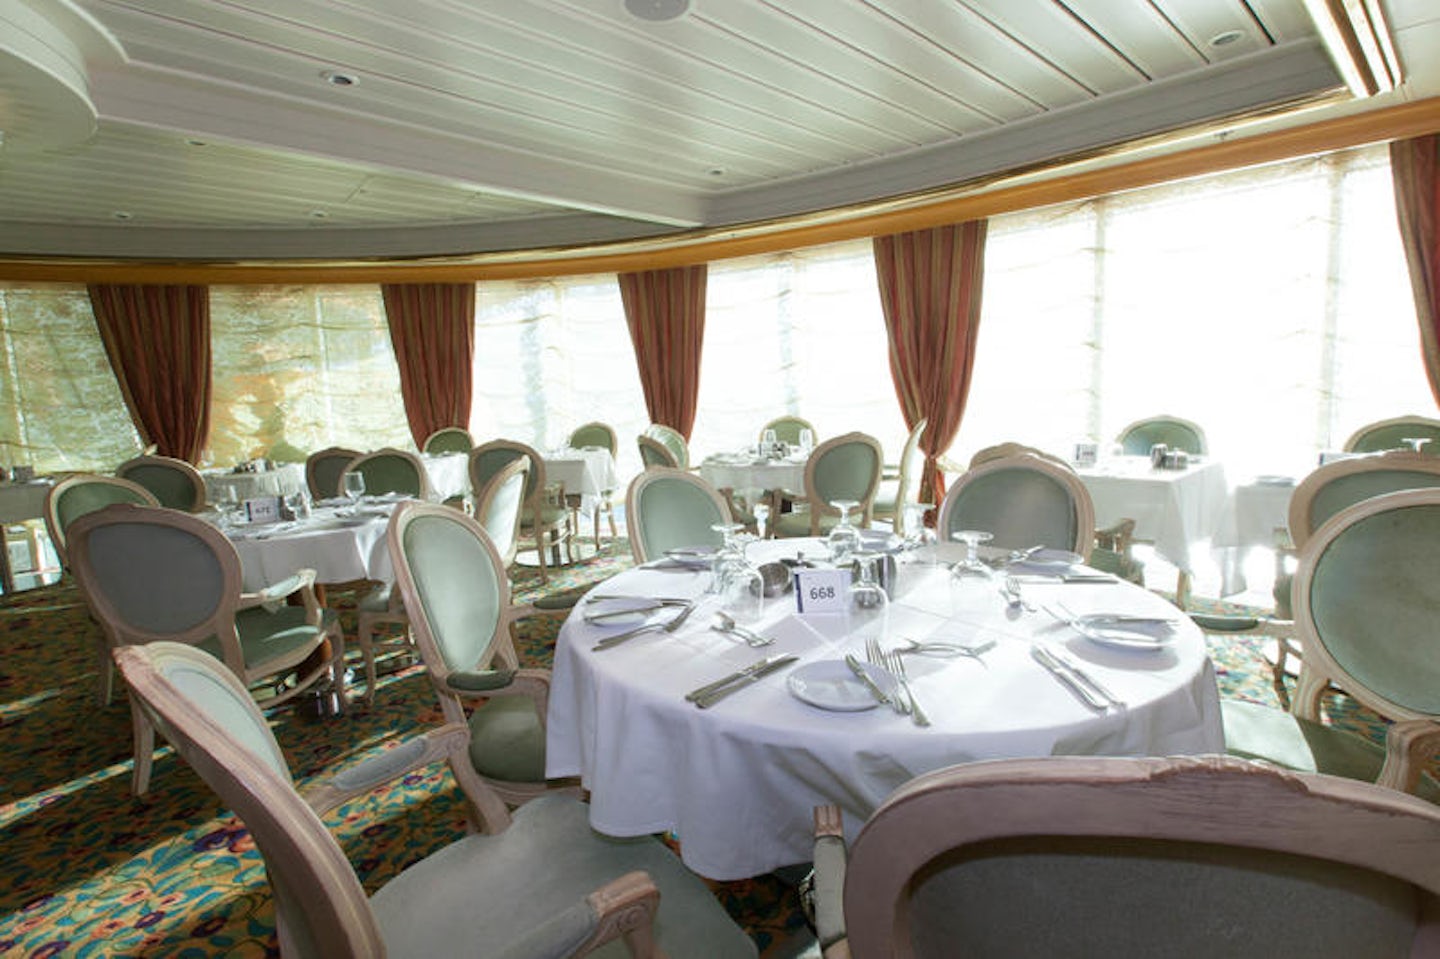 King Lear Dining Room on Independence of the Seas